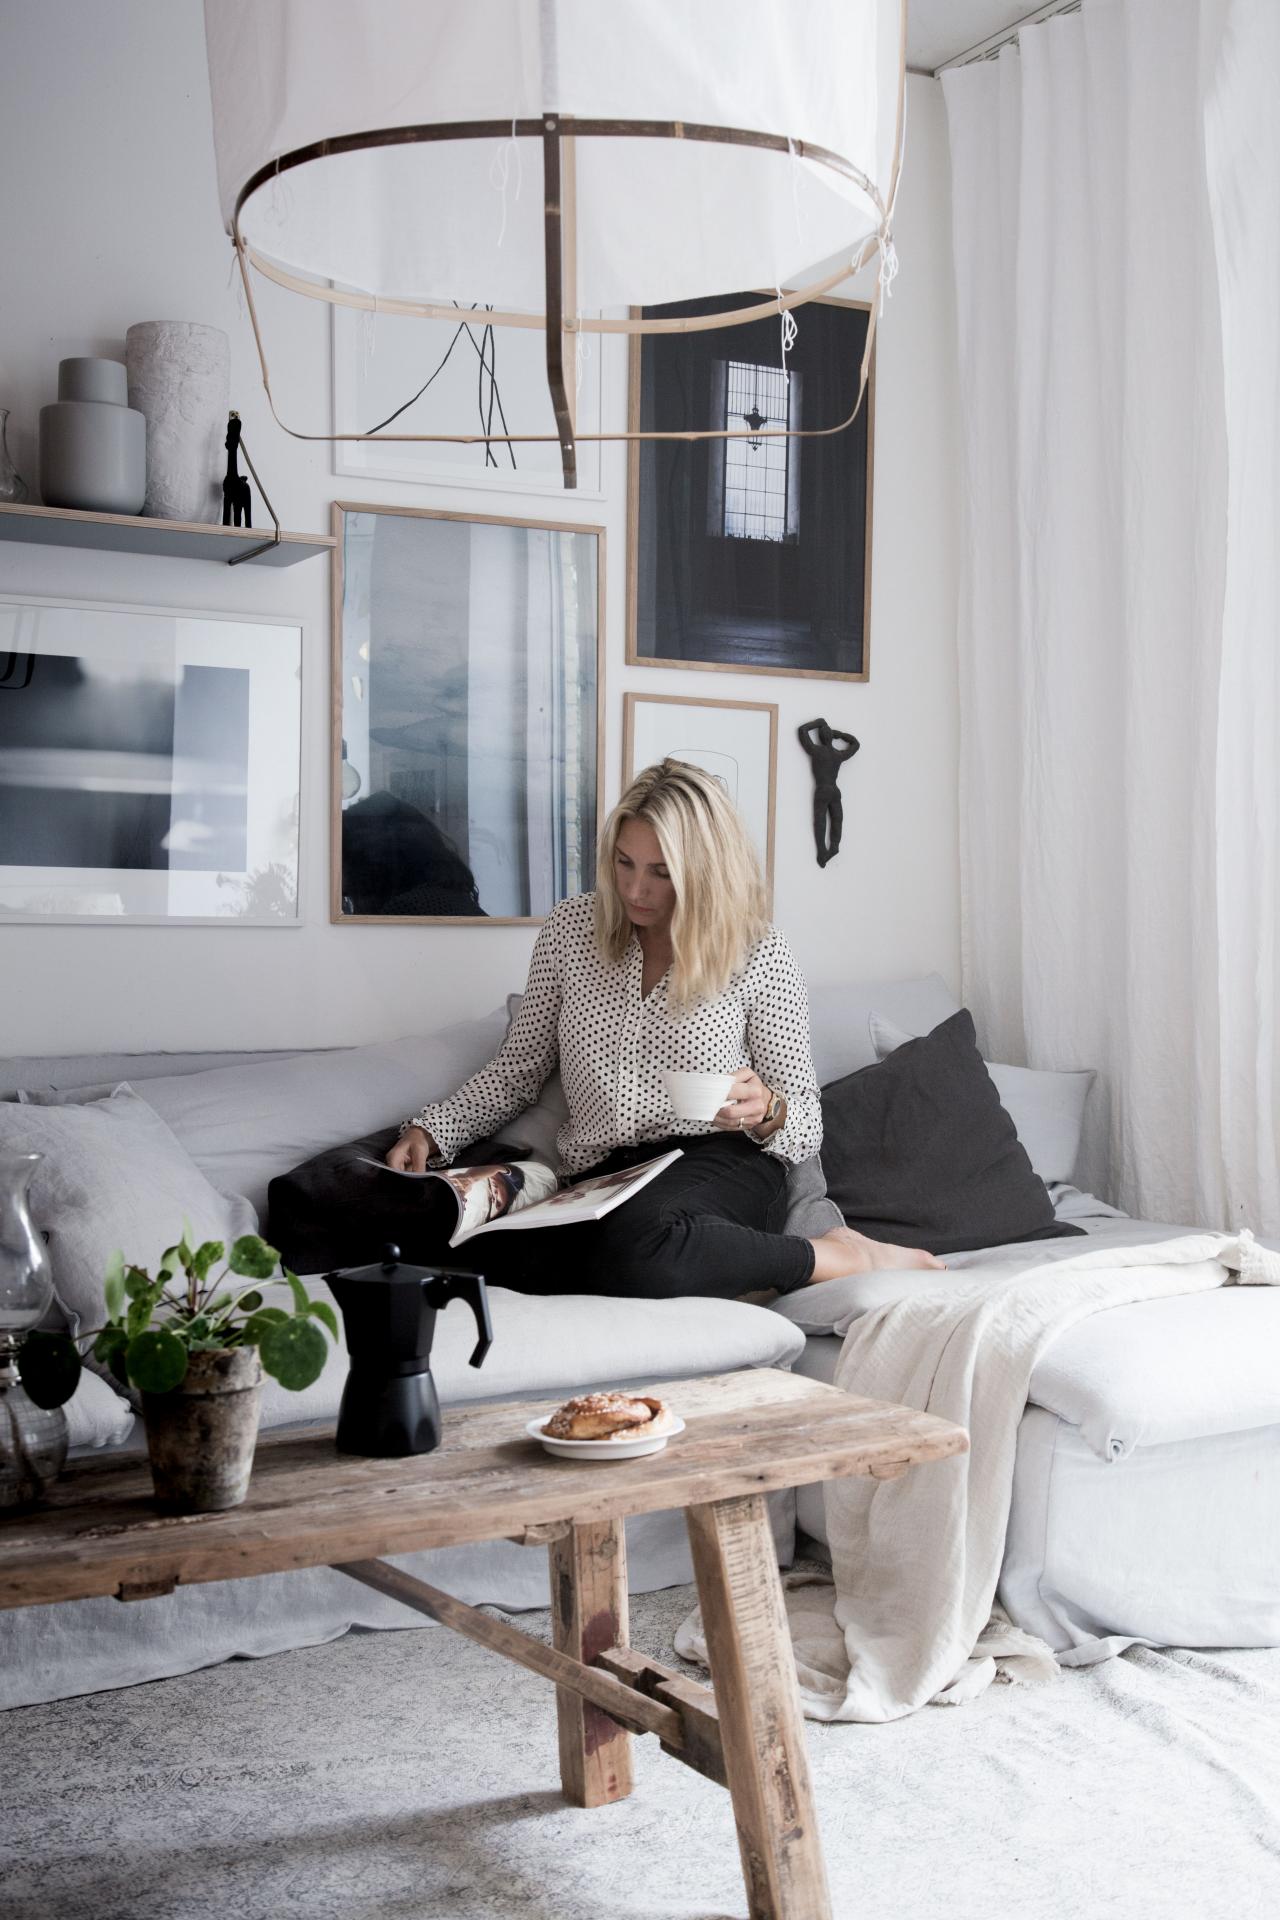 How to Add Scandinavian Style to Your Space | HGTV